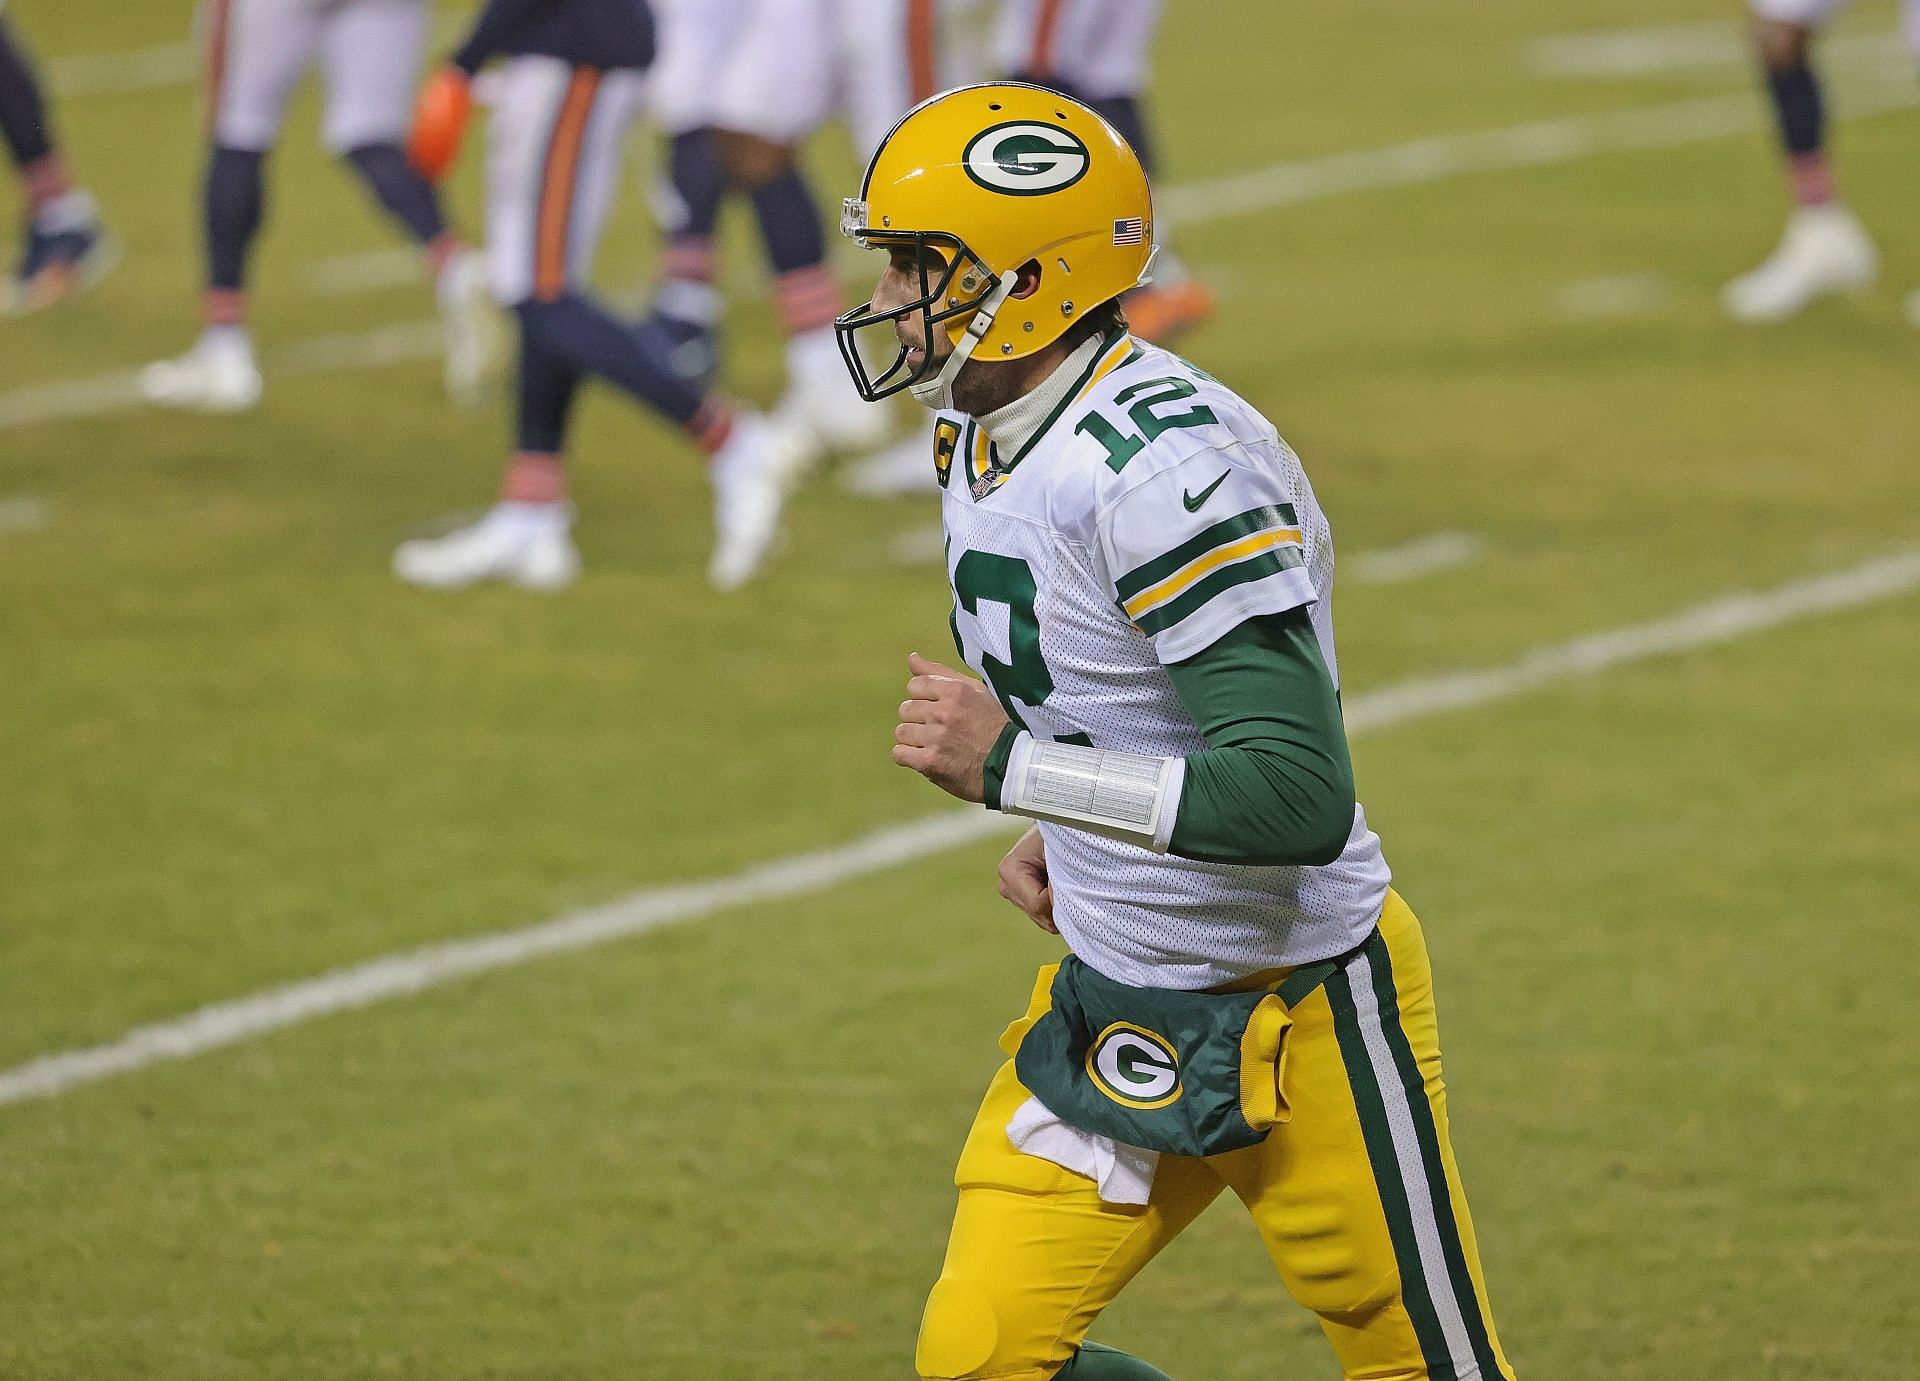 The Green Bay Packers face the Chicago Bears on Sunday